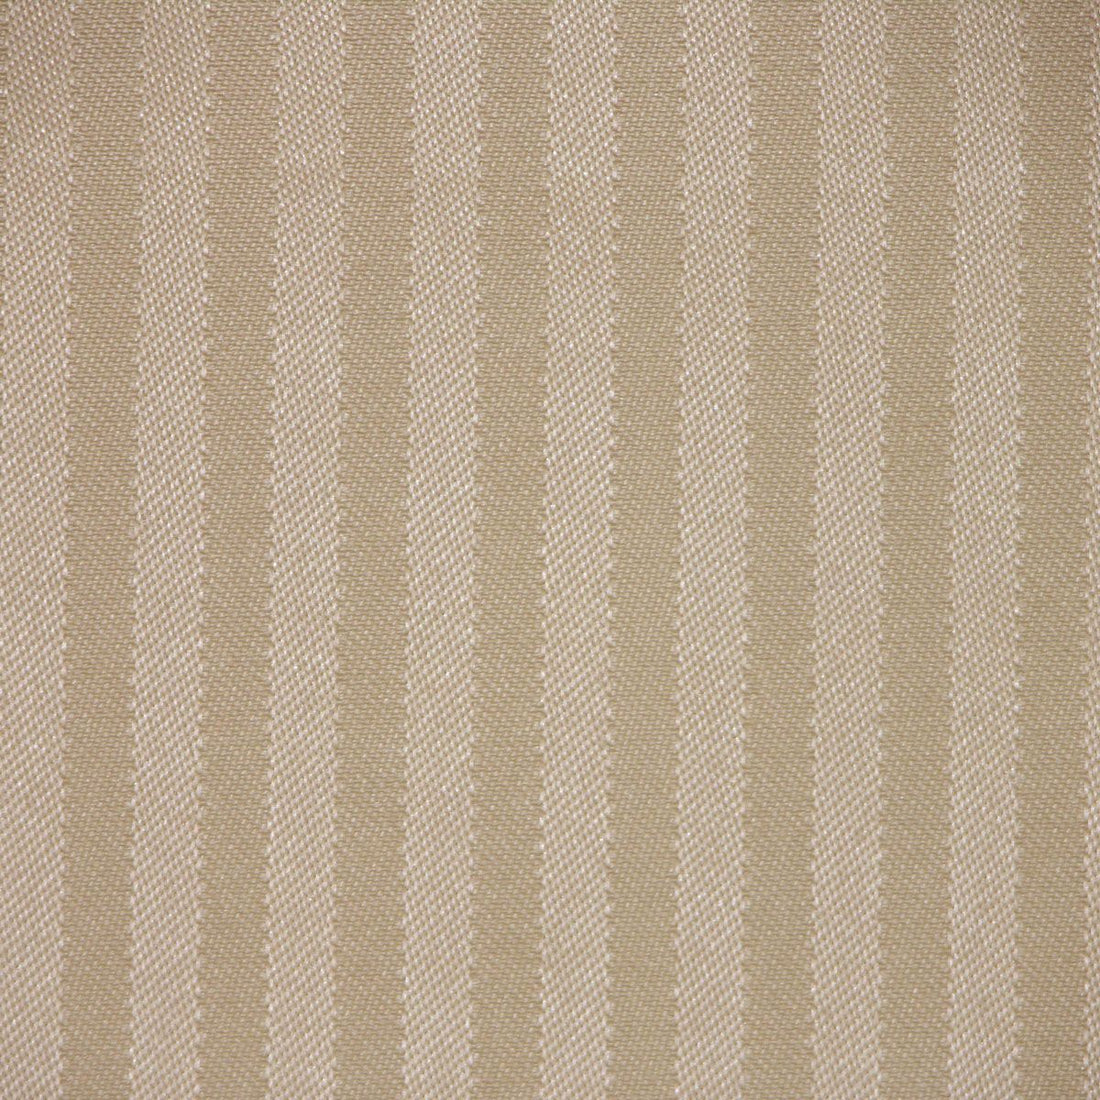 Davenport fabric in driftwood color - pattern number WR 54622244 - by Scalamandre in the Old World Weavers collection